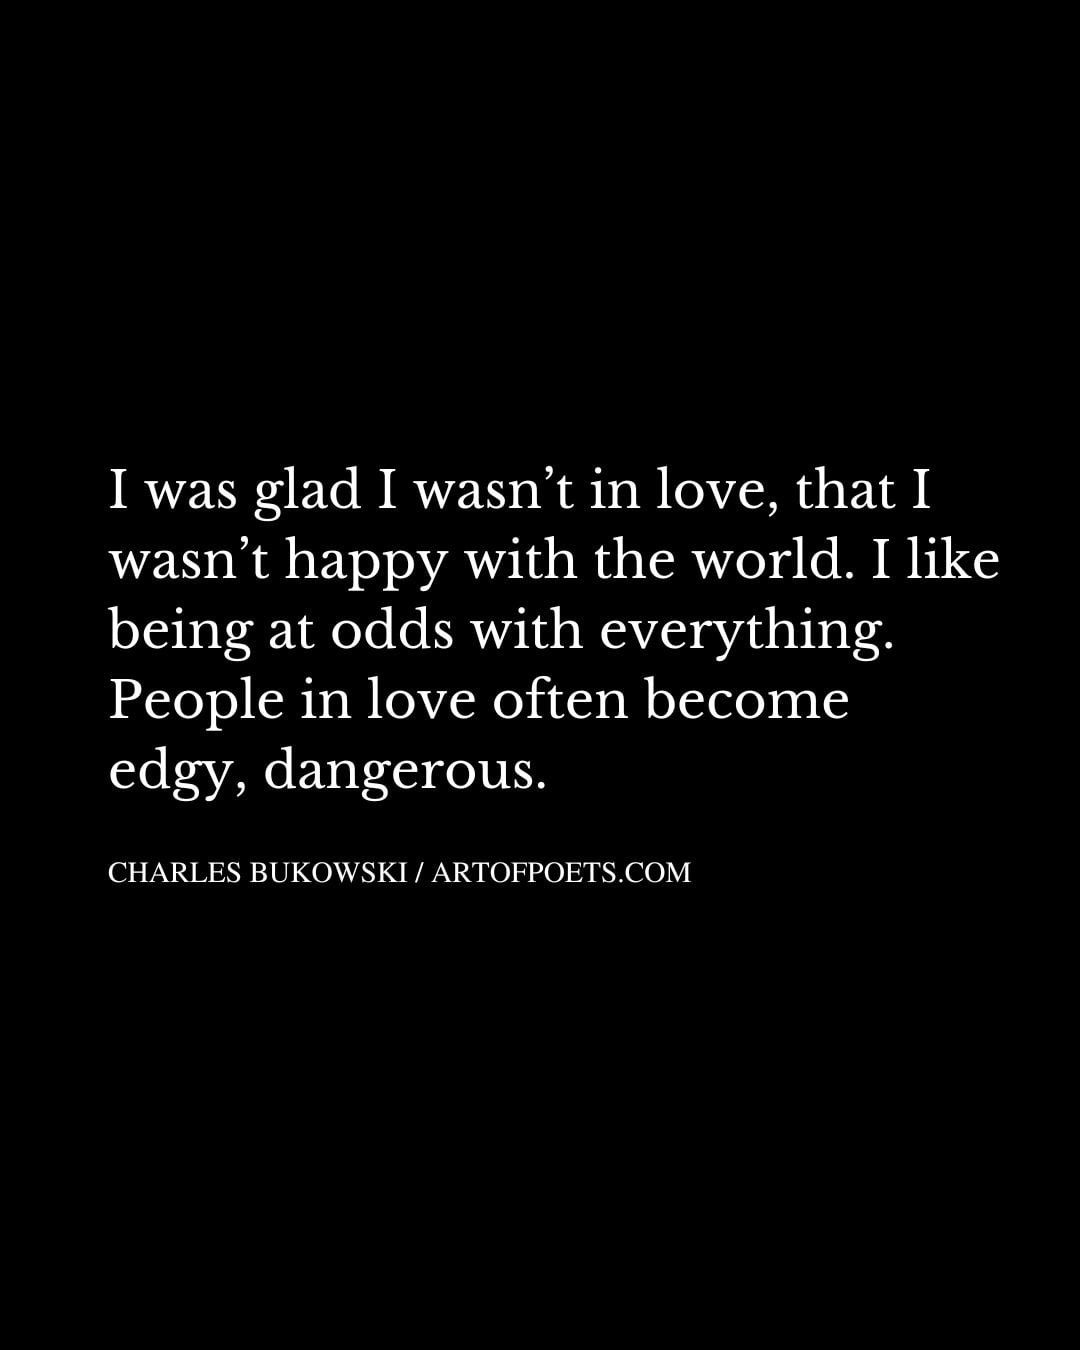 I was glad I wasnt in love that I wasnt happy with the world